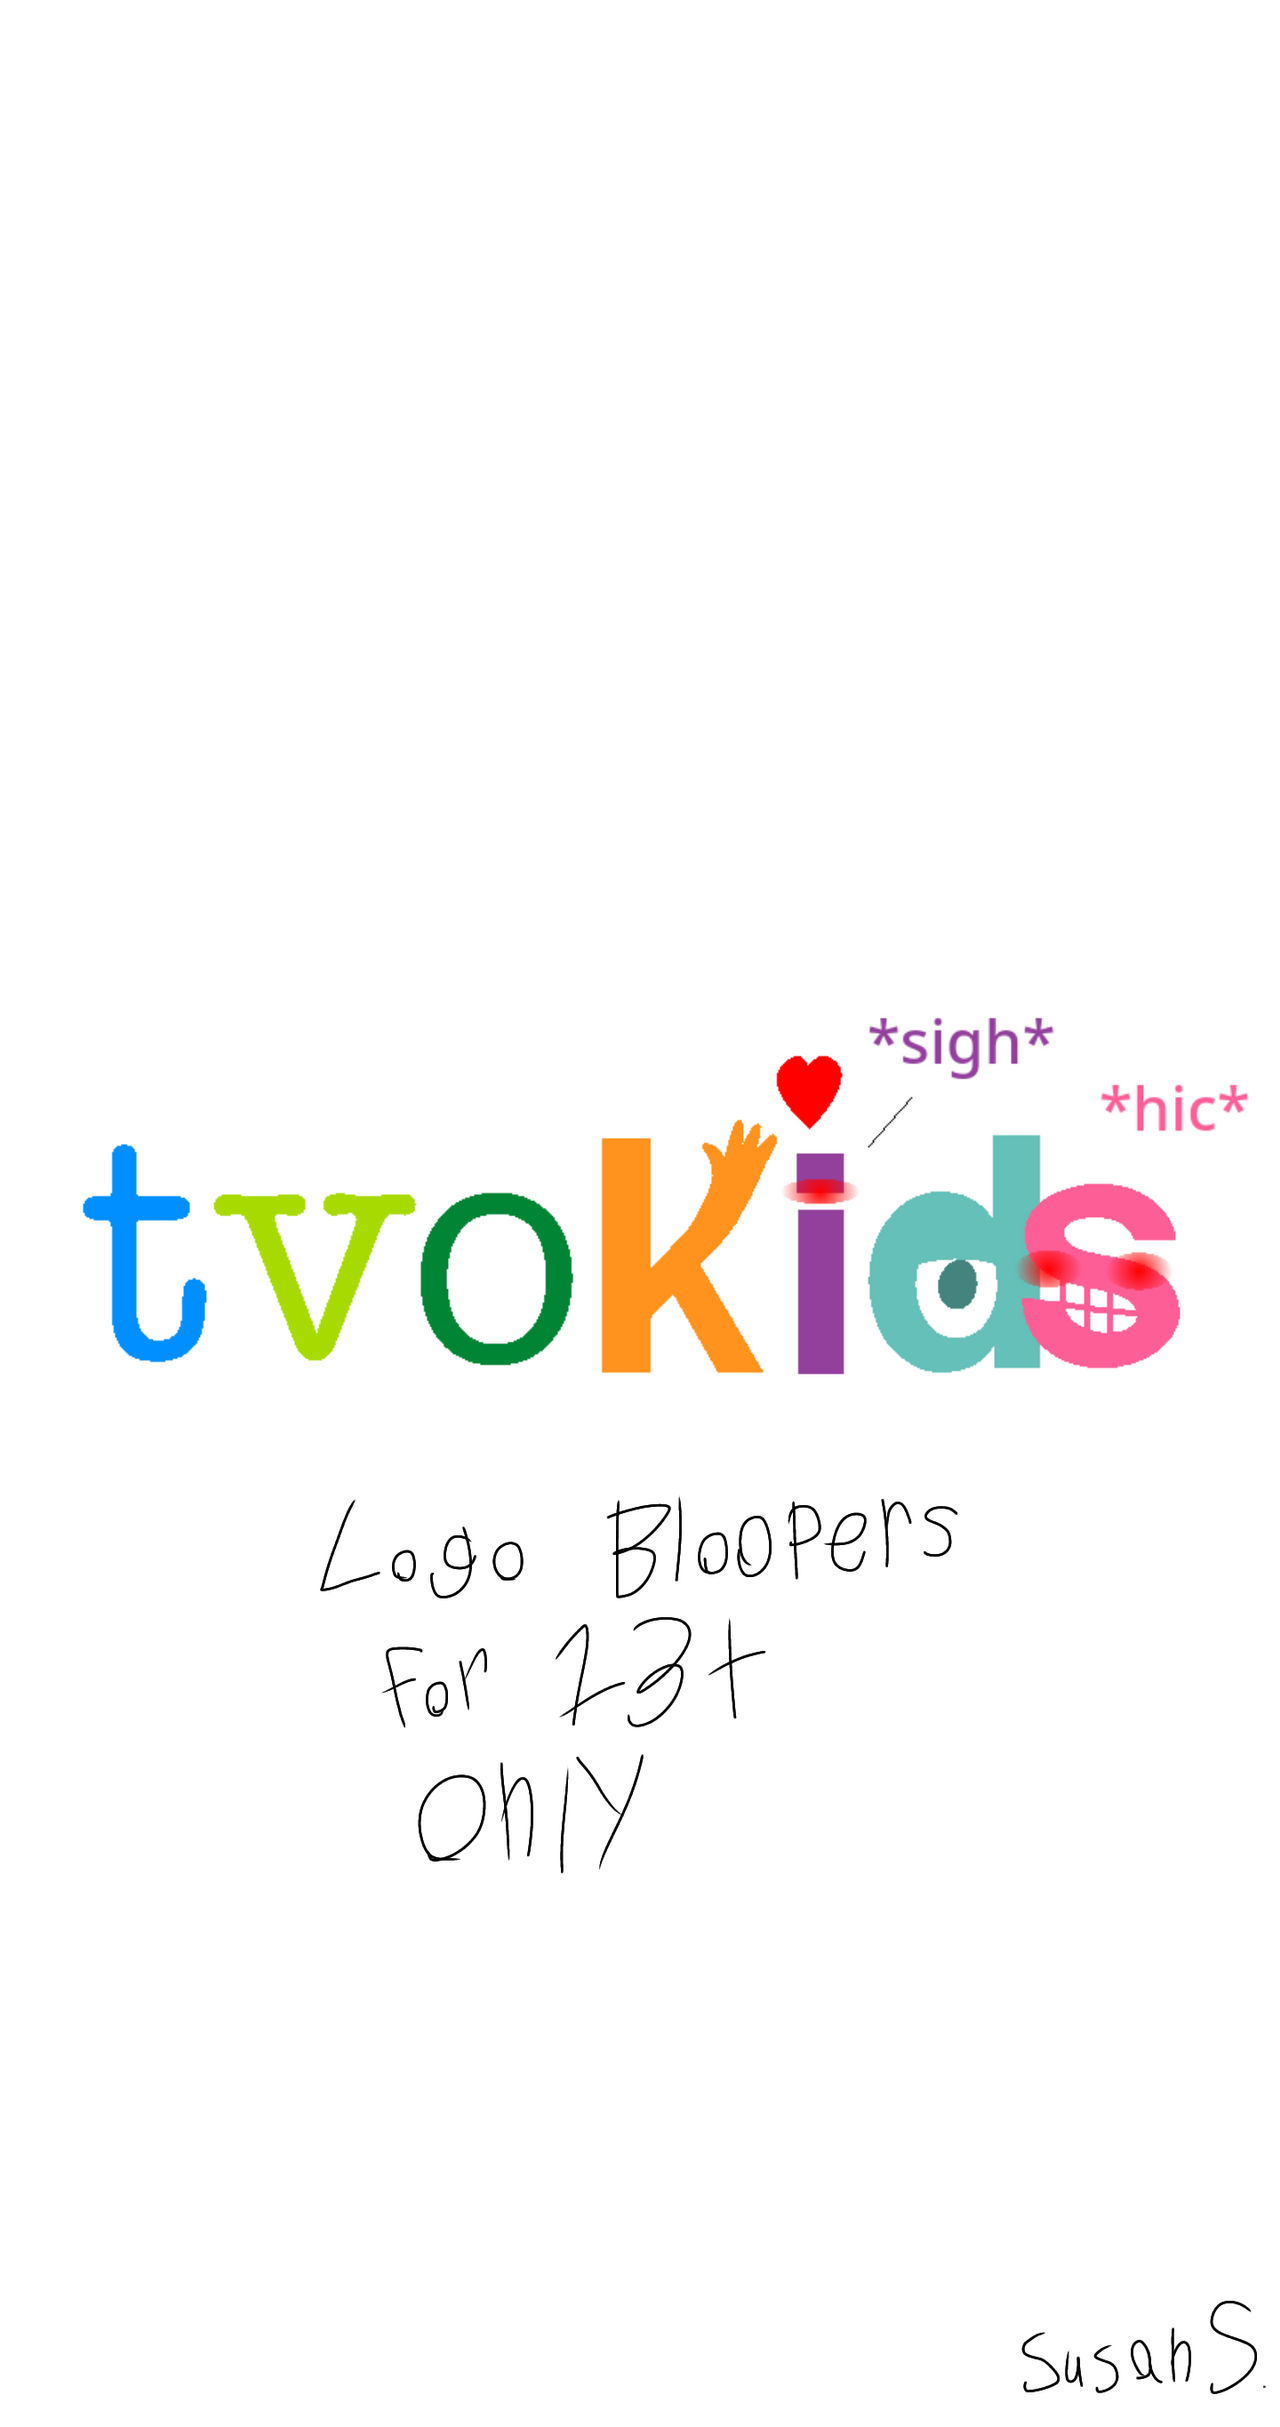 TVOKids Logo Bloopers for +13 Only Wallpaper by SusalynnArt on